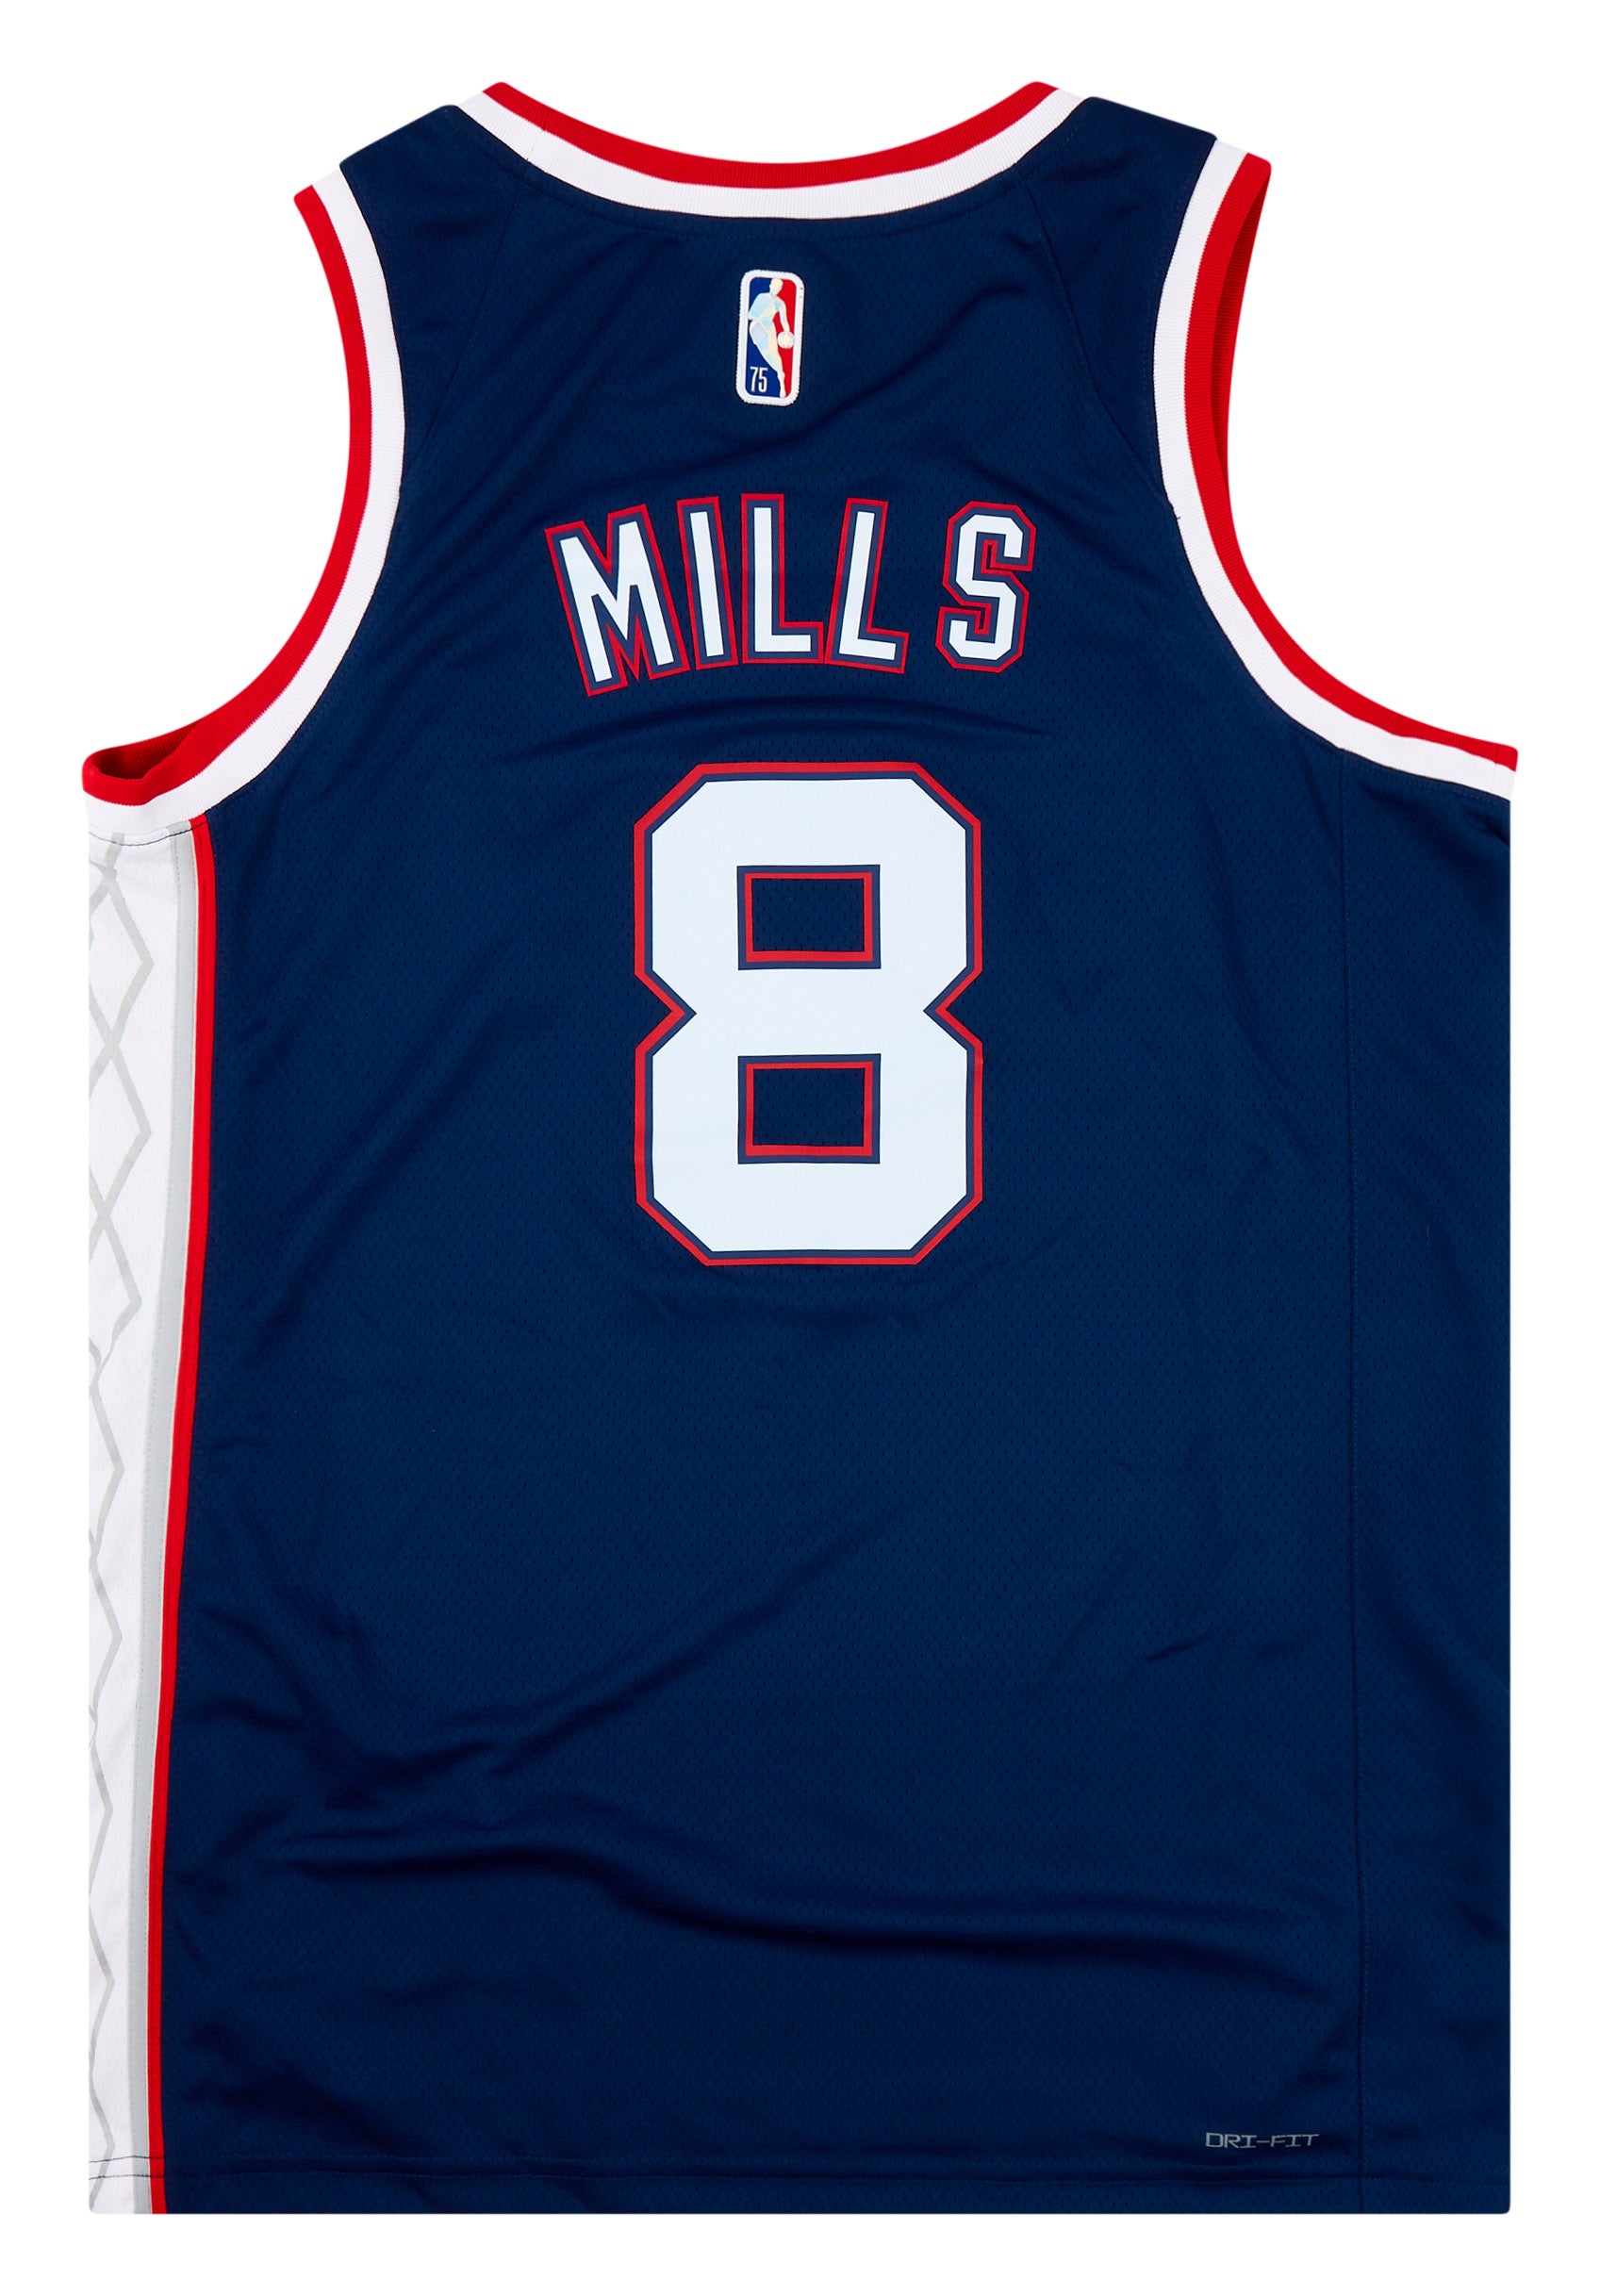 New Jersey Nets – Mr. Throwback NYC